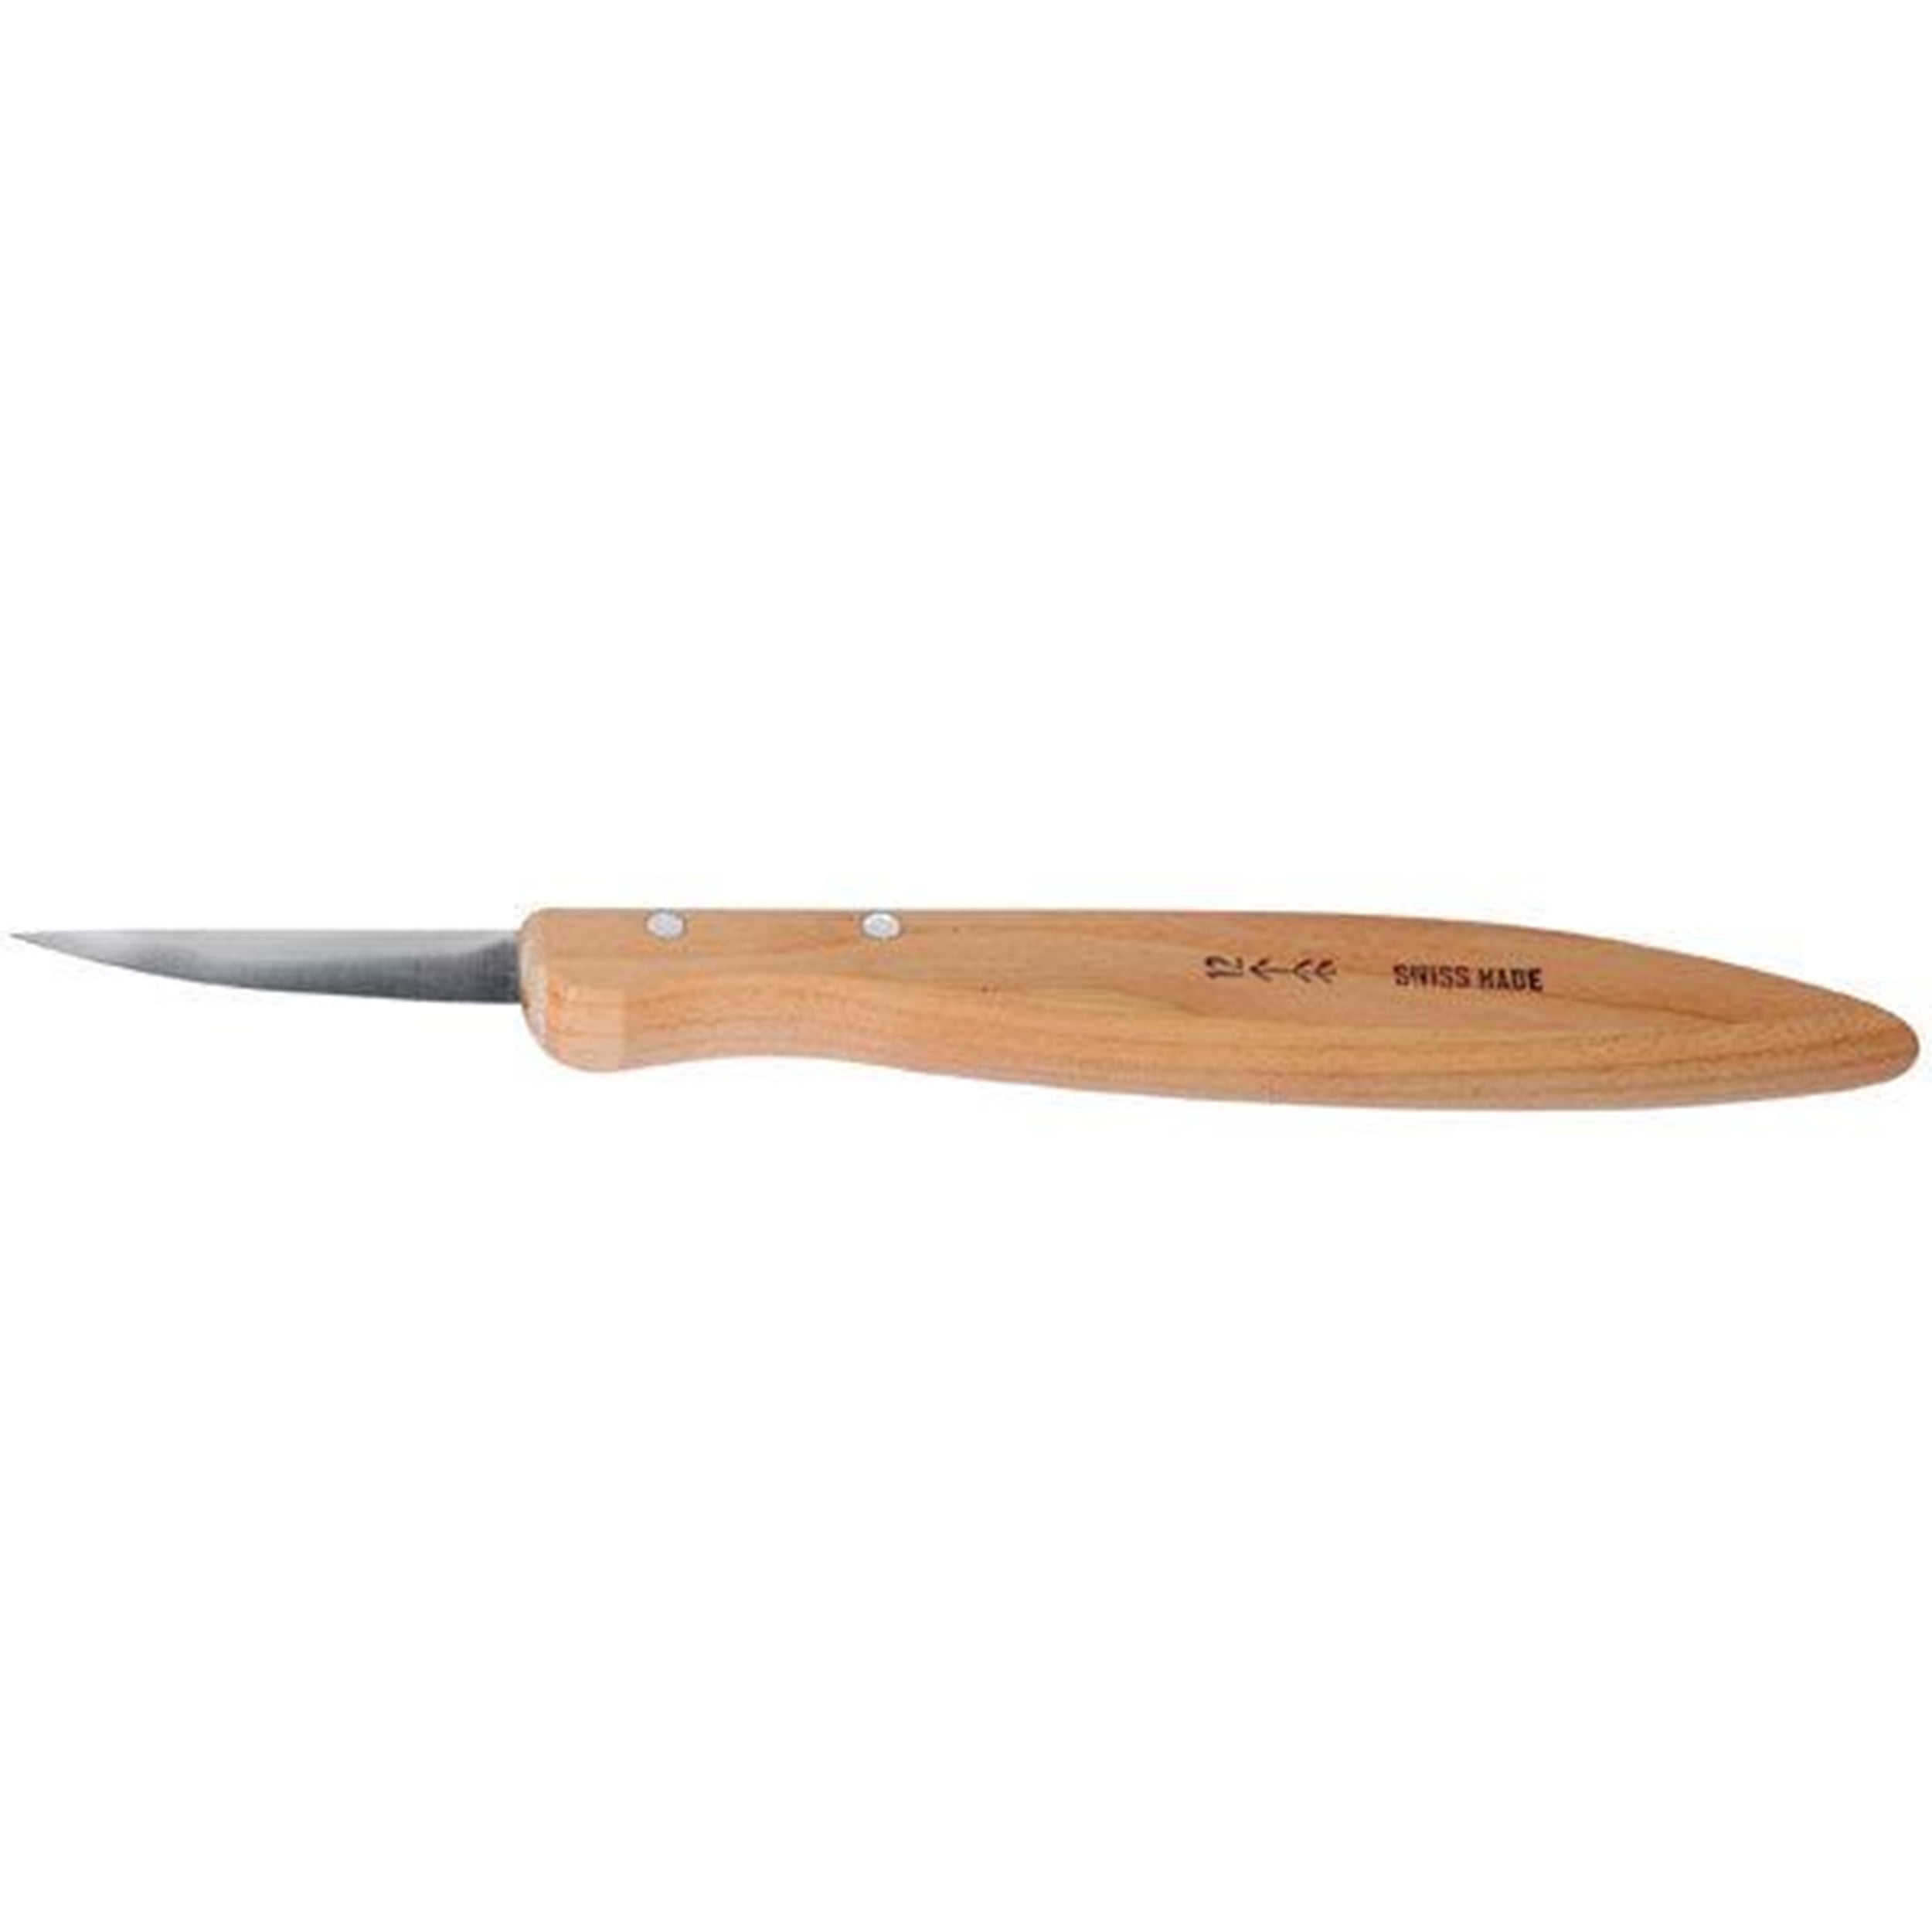 7 Kerb Chip Carving Knife by Pfeil